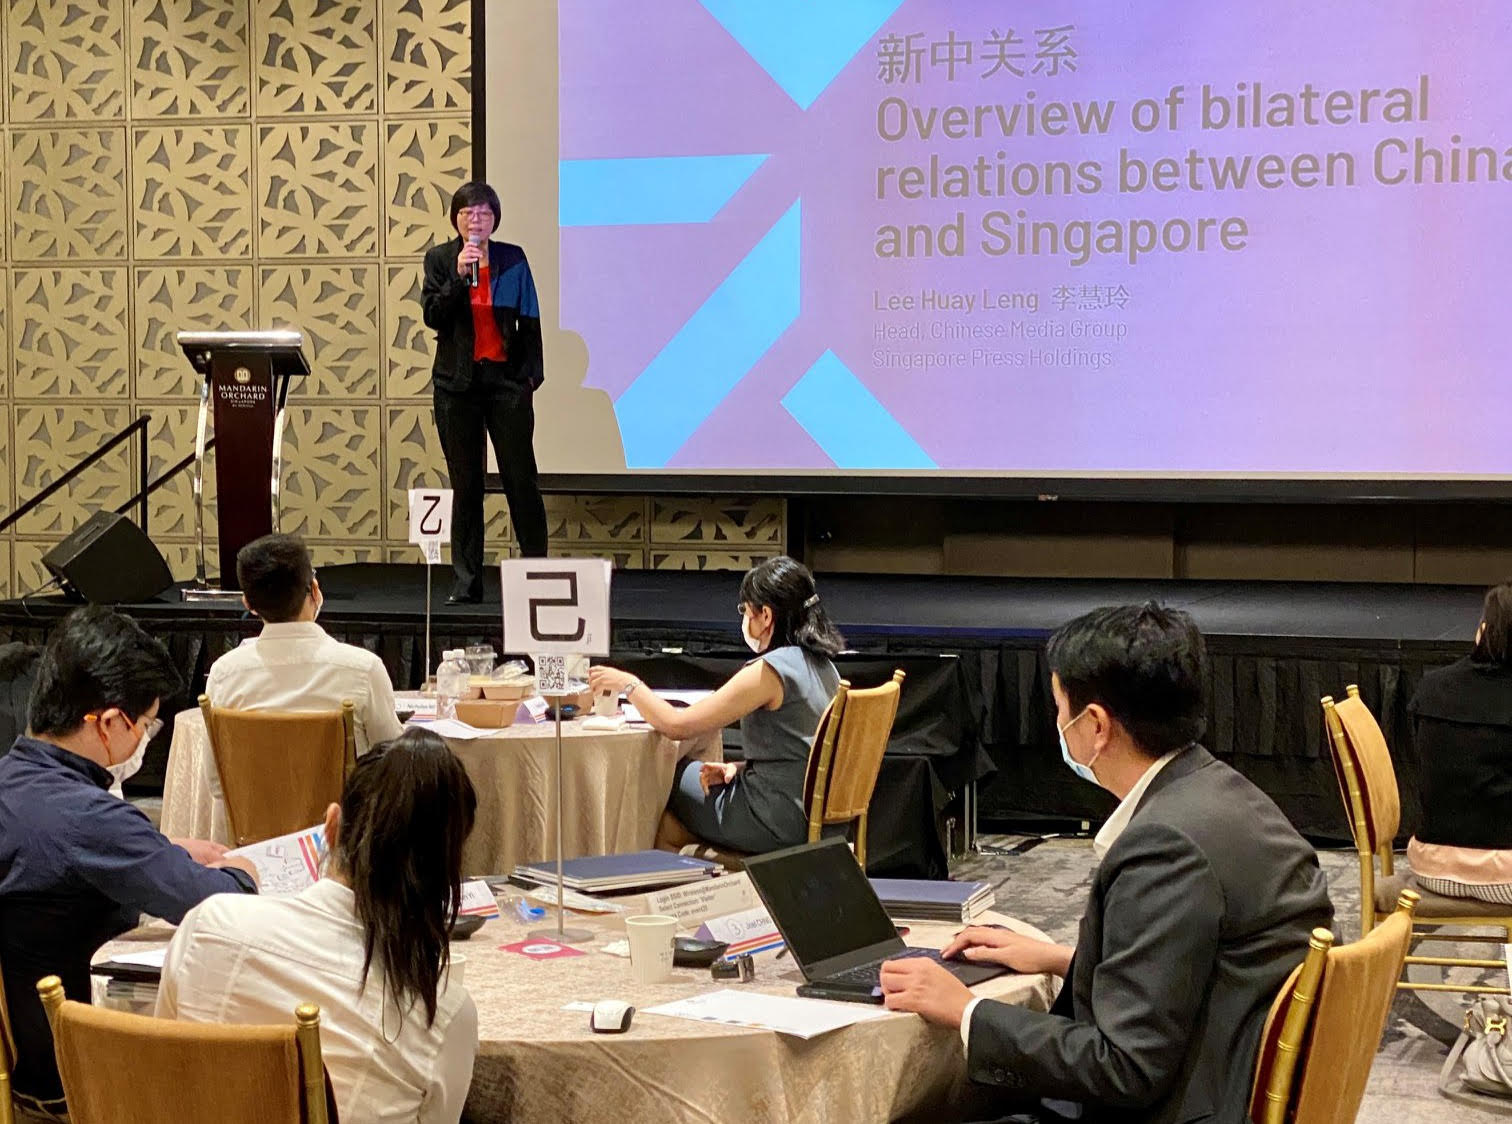 The programme covered topics such as Chinese business communications skills and bilateral relations between Singapore and China.